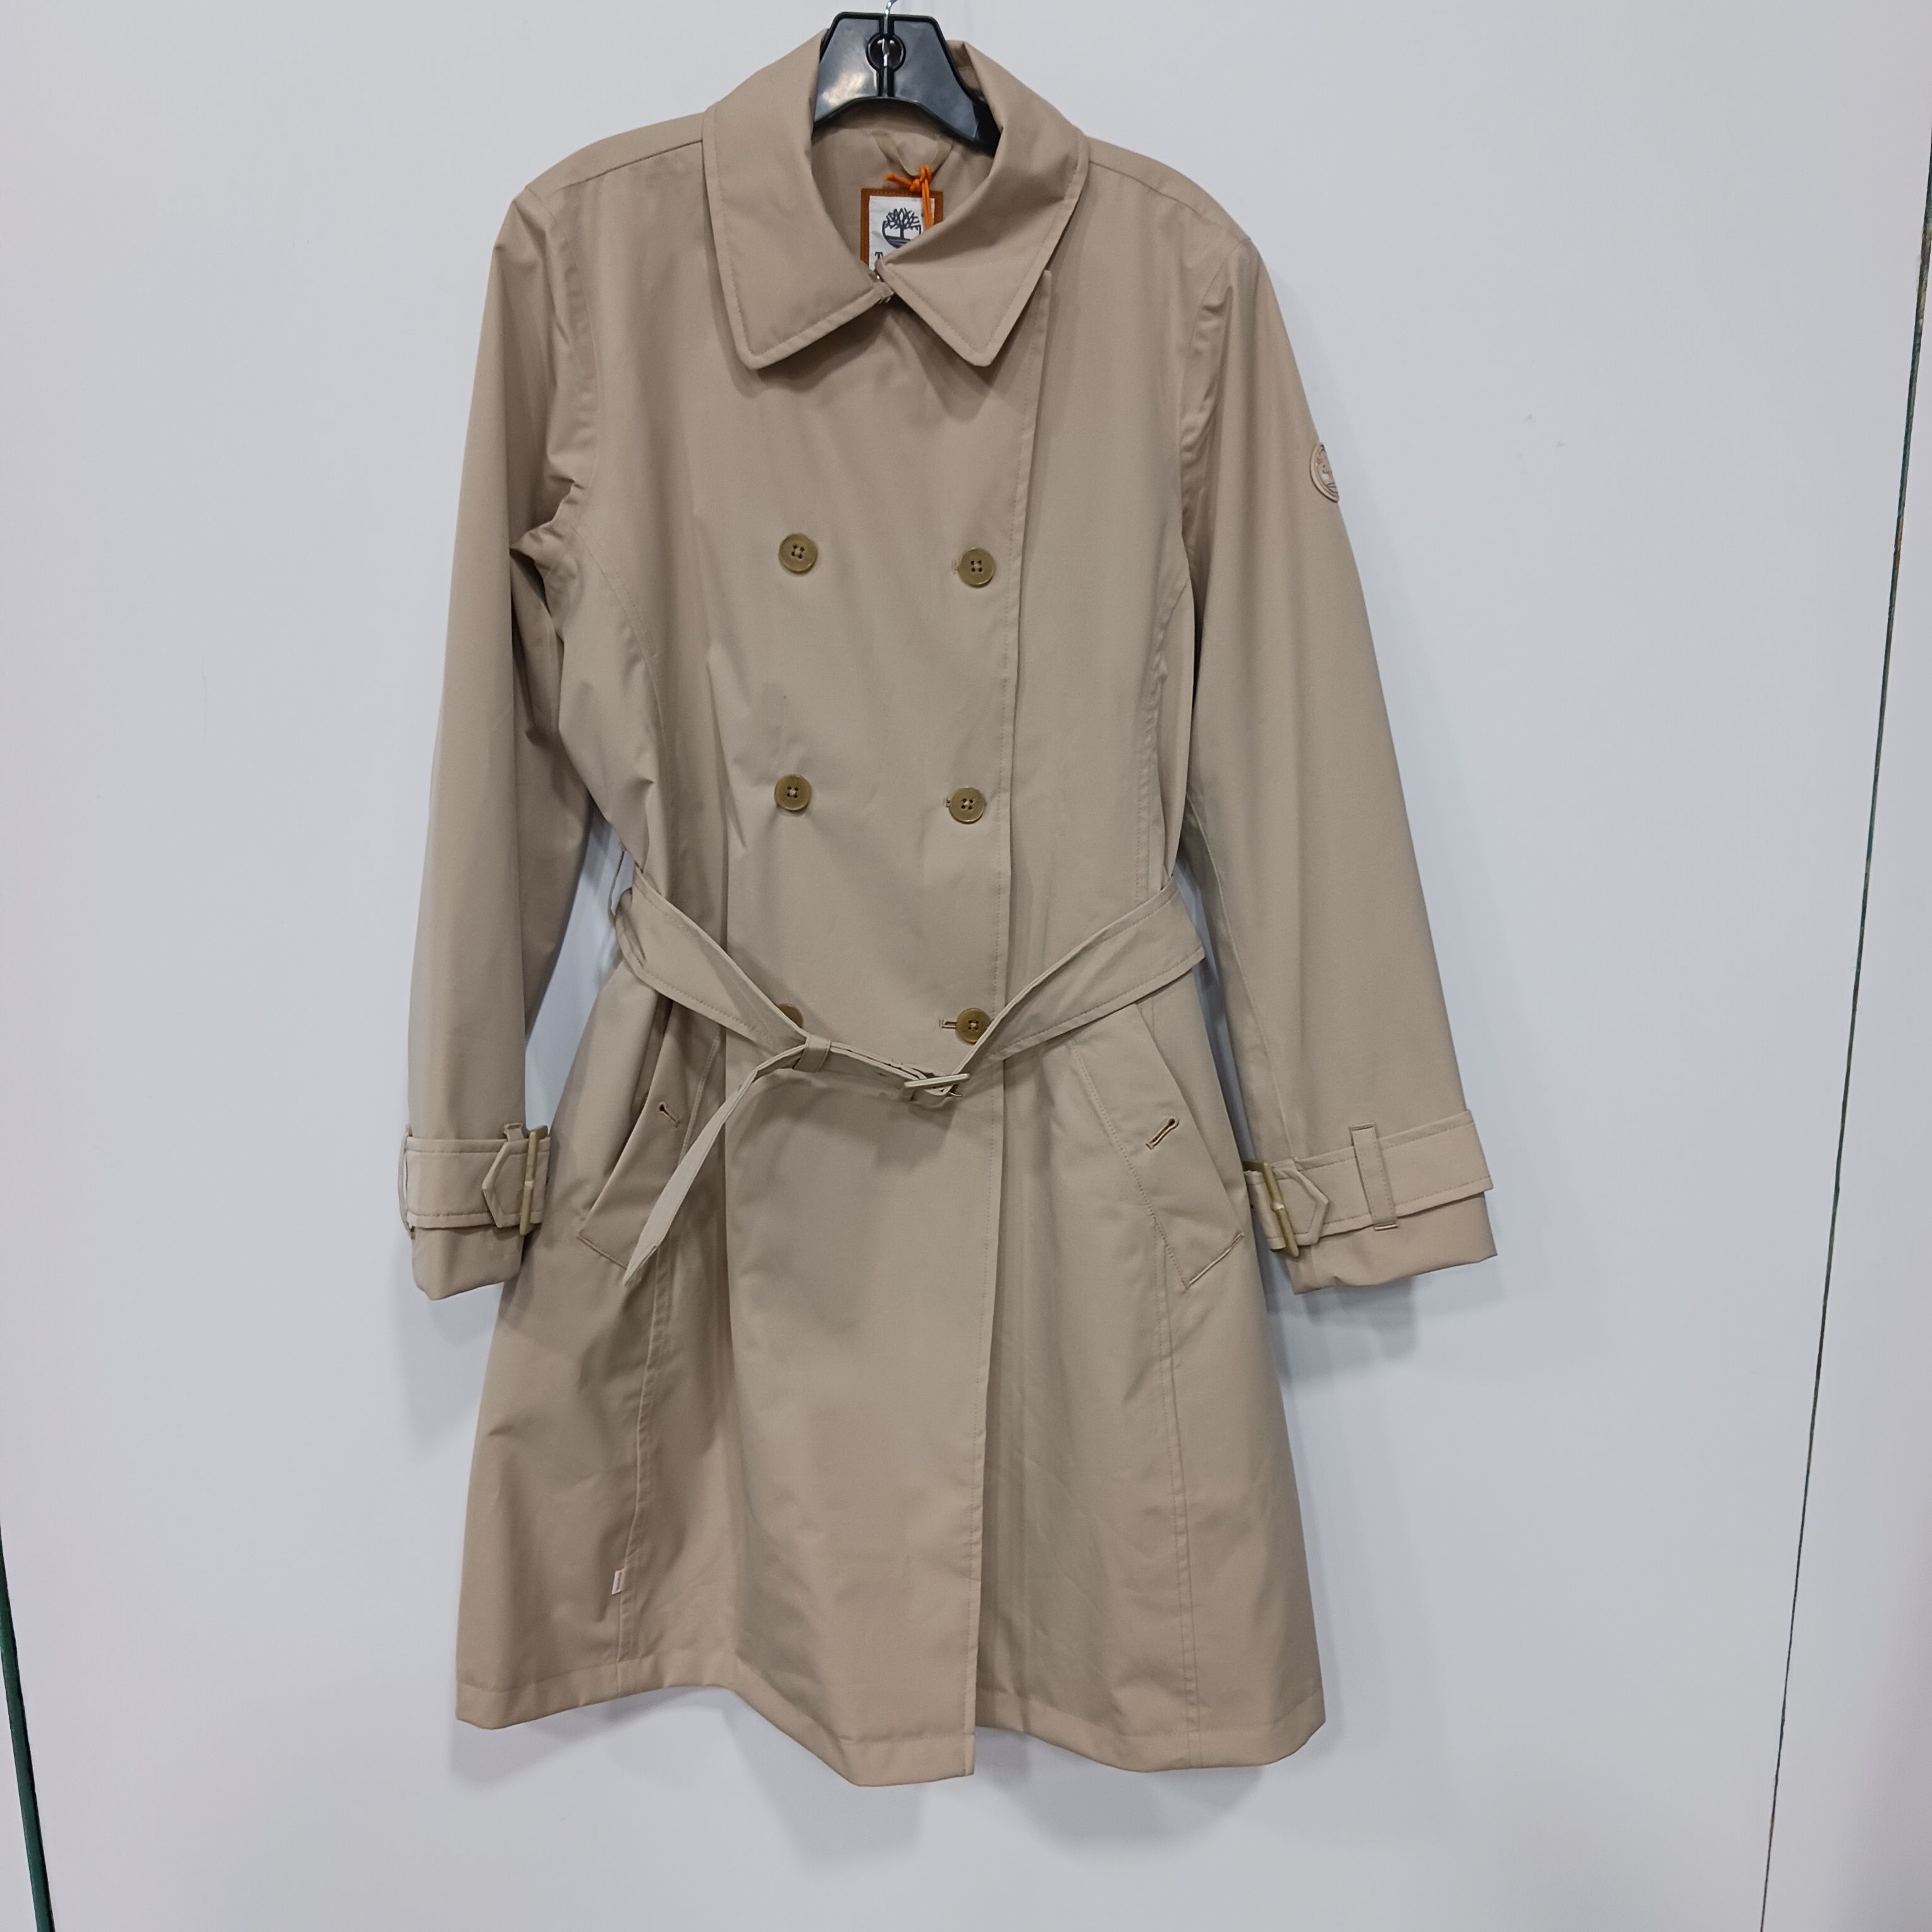 Buy the Timberland Women's Tan Trench Coat with Belt Size M NWT ...